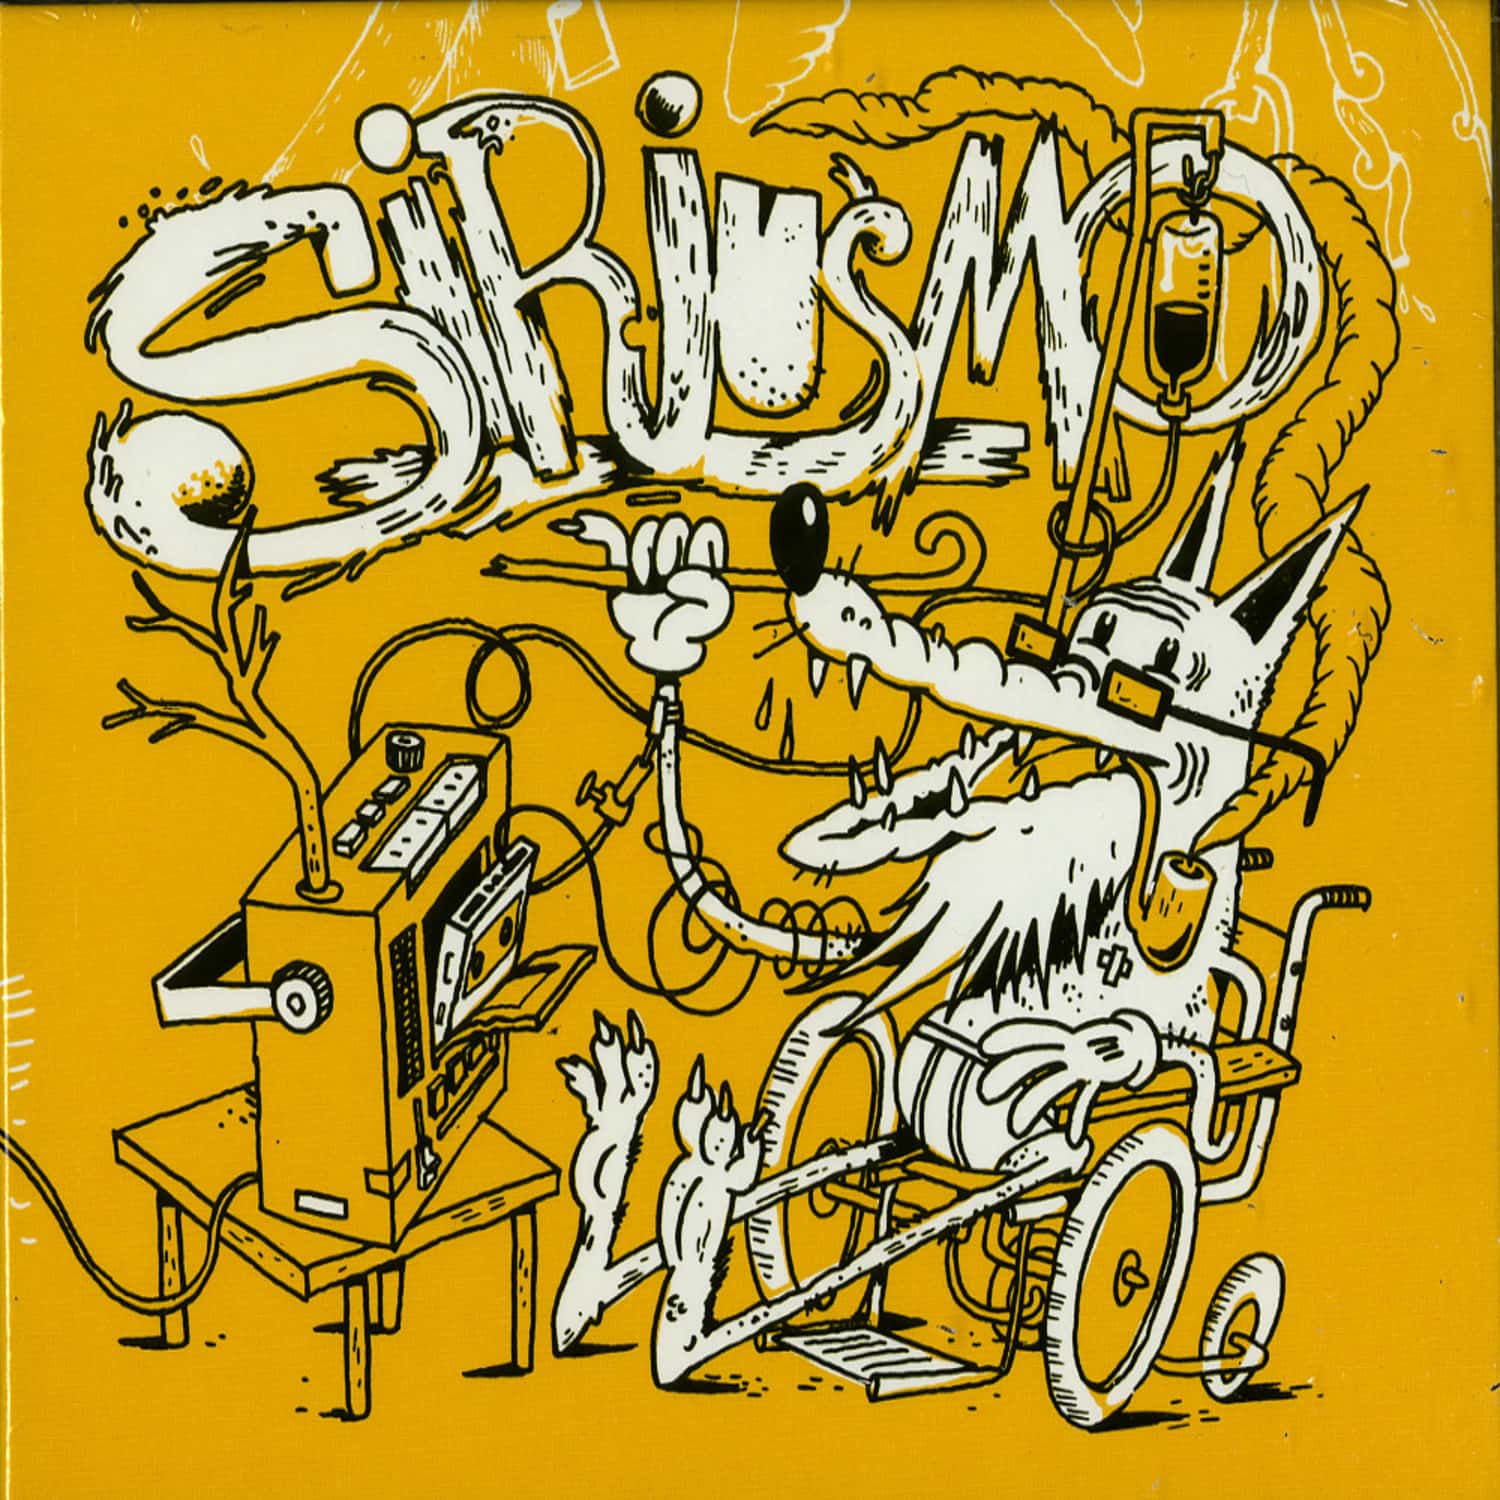 Siriusmo - PEARLS AND EMBARRASSMENTS 2000 - 2010 